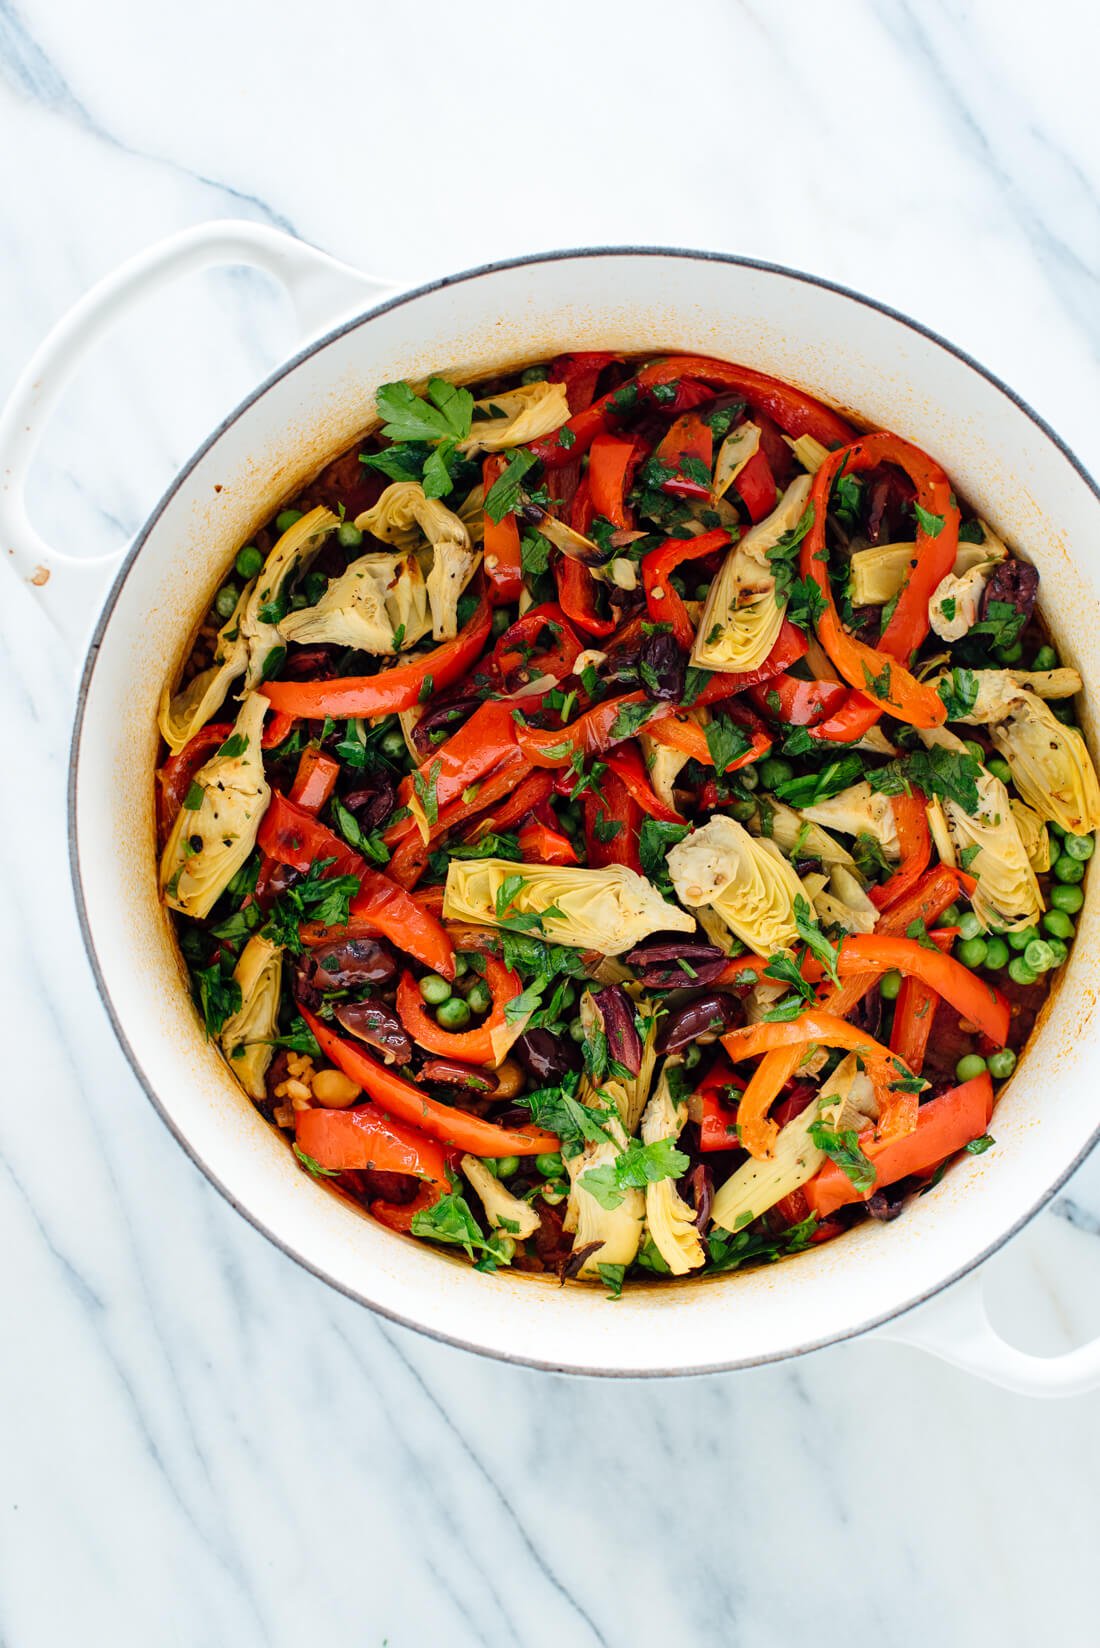 This vibrant vegetable paella recipe is so easy to make in the oven! #vegetarian #vegan